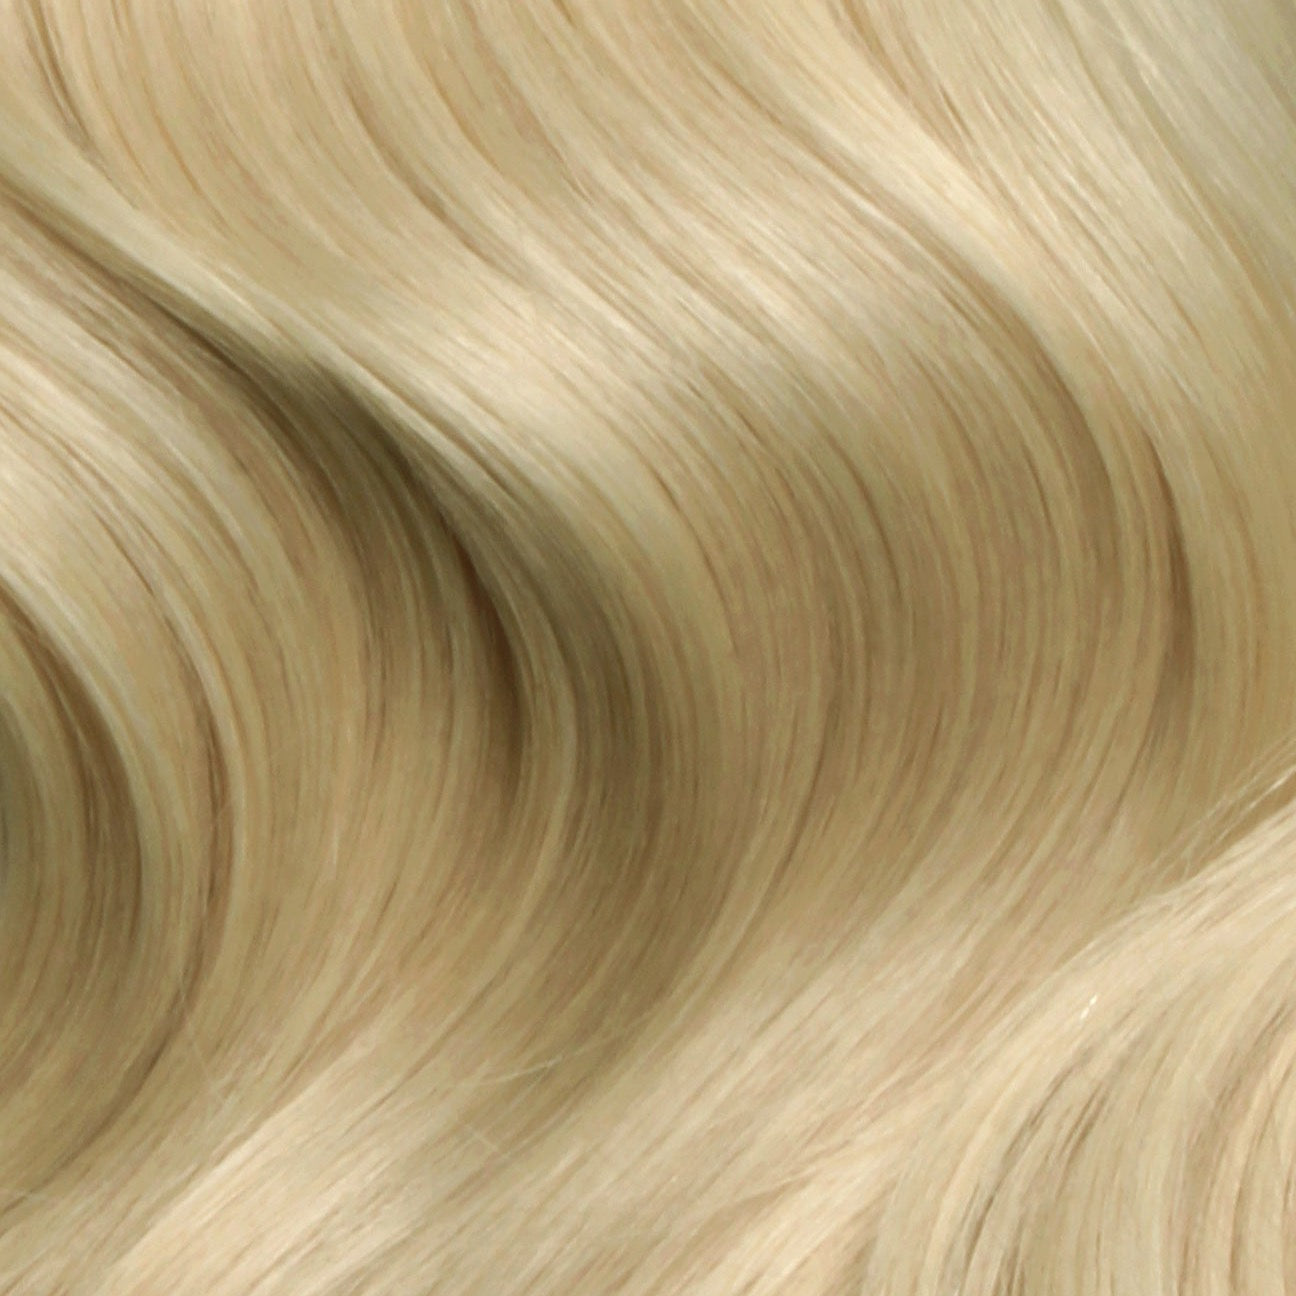 Nano Bonds 20 Inches - SWAY Hair Extensions Honey-Blonde-613 Ultra-fine, invisible bonds for a flawless, natural look. 100% Remy Human hair, lightweight and versatile. Reusable and perfect for individual or salon use.